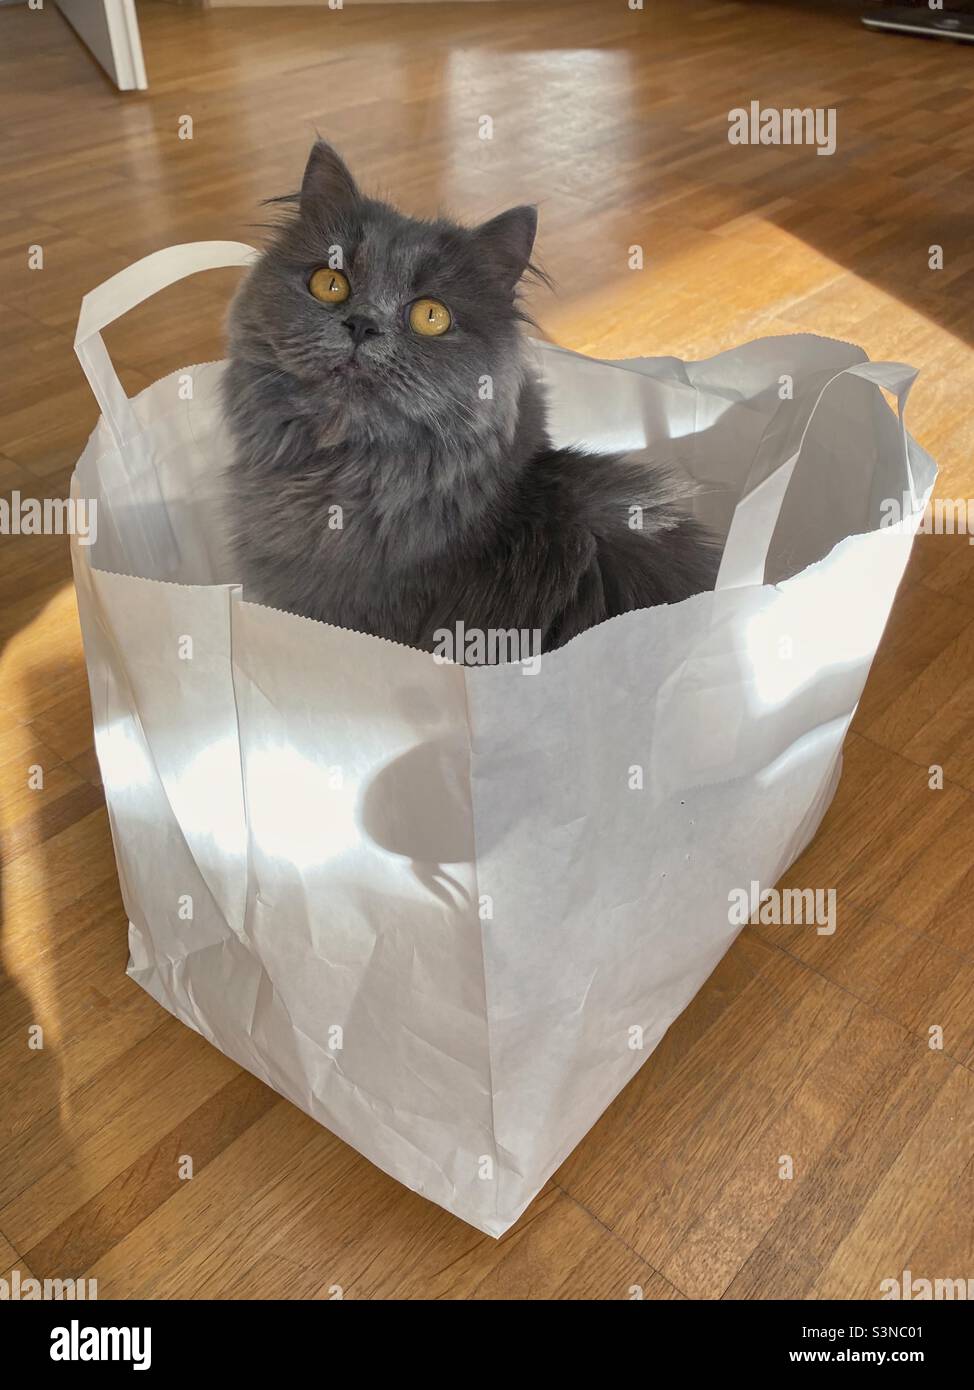 Young Blue Persian cat sitting in a paper bag on a wooden floor. Stock Photo